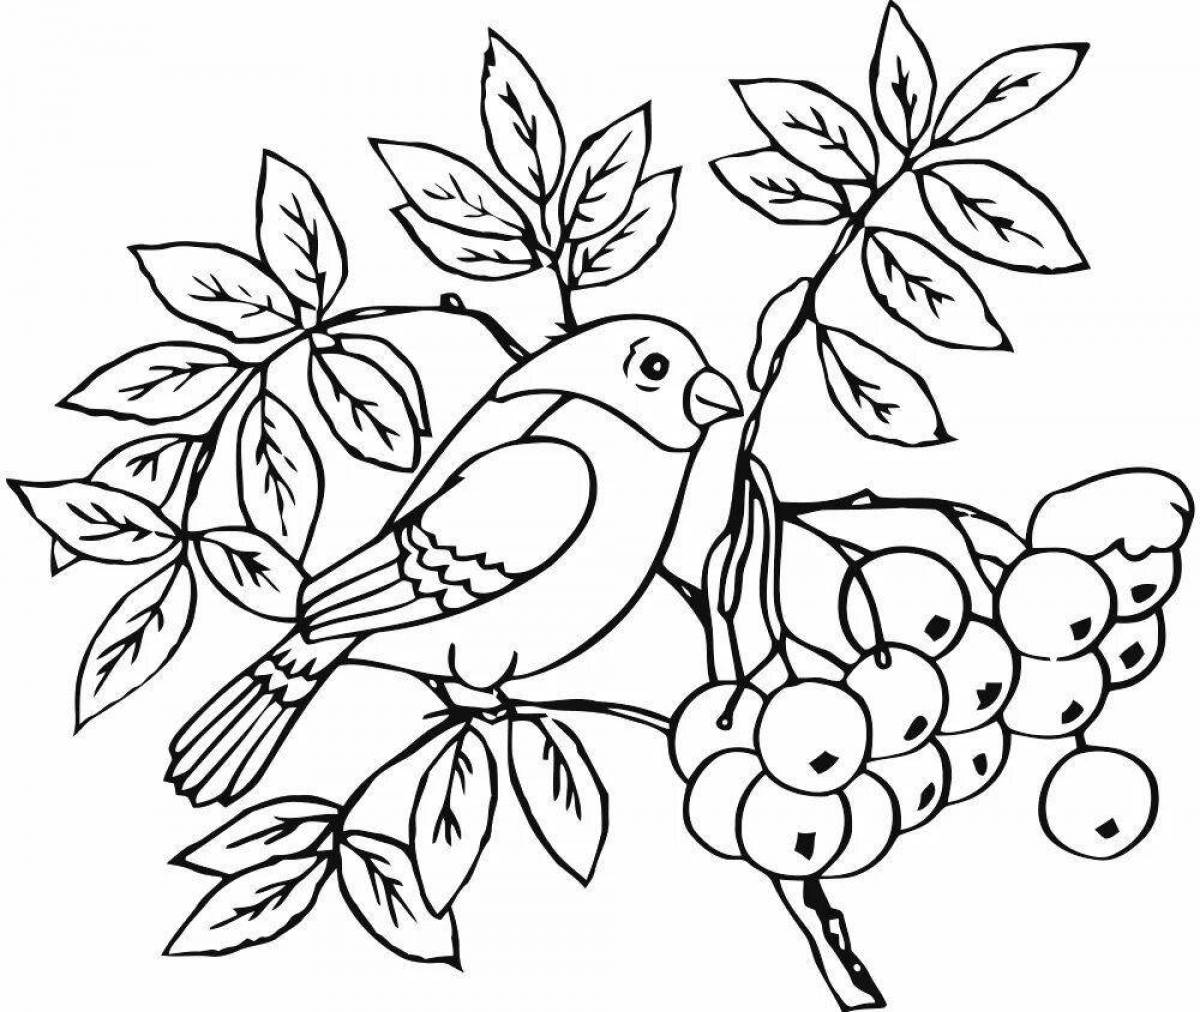 Delightful drawing of a bullfinch on a branch